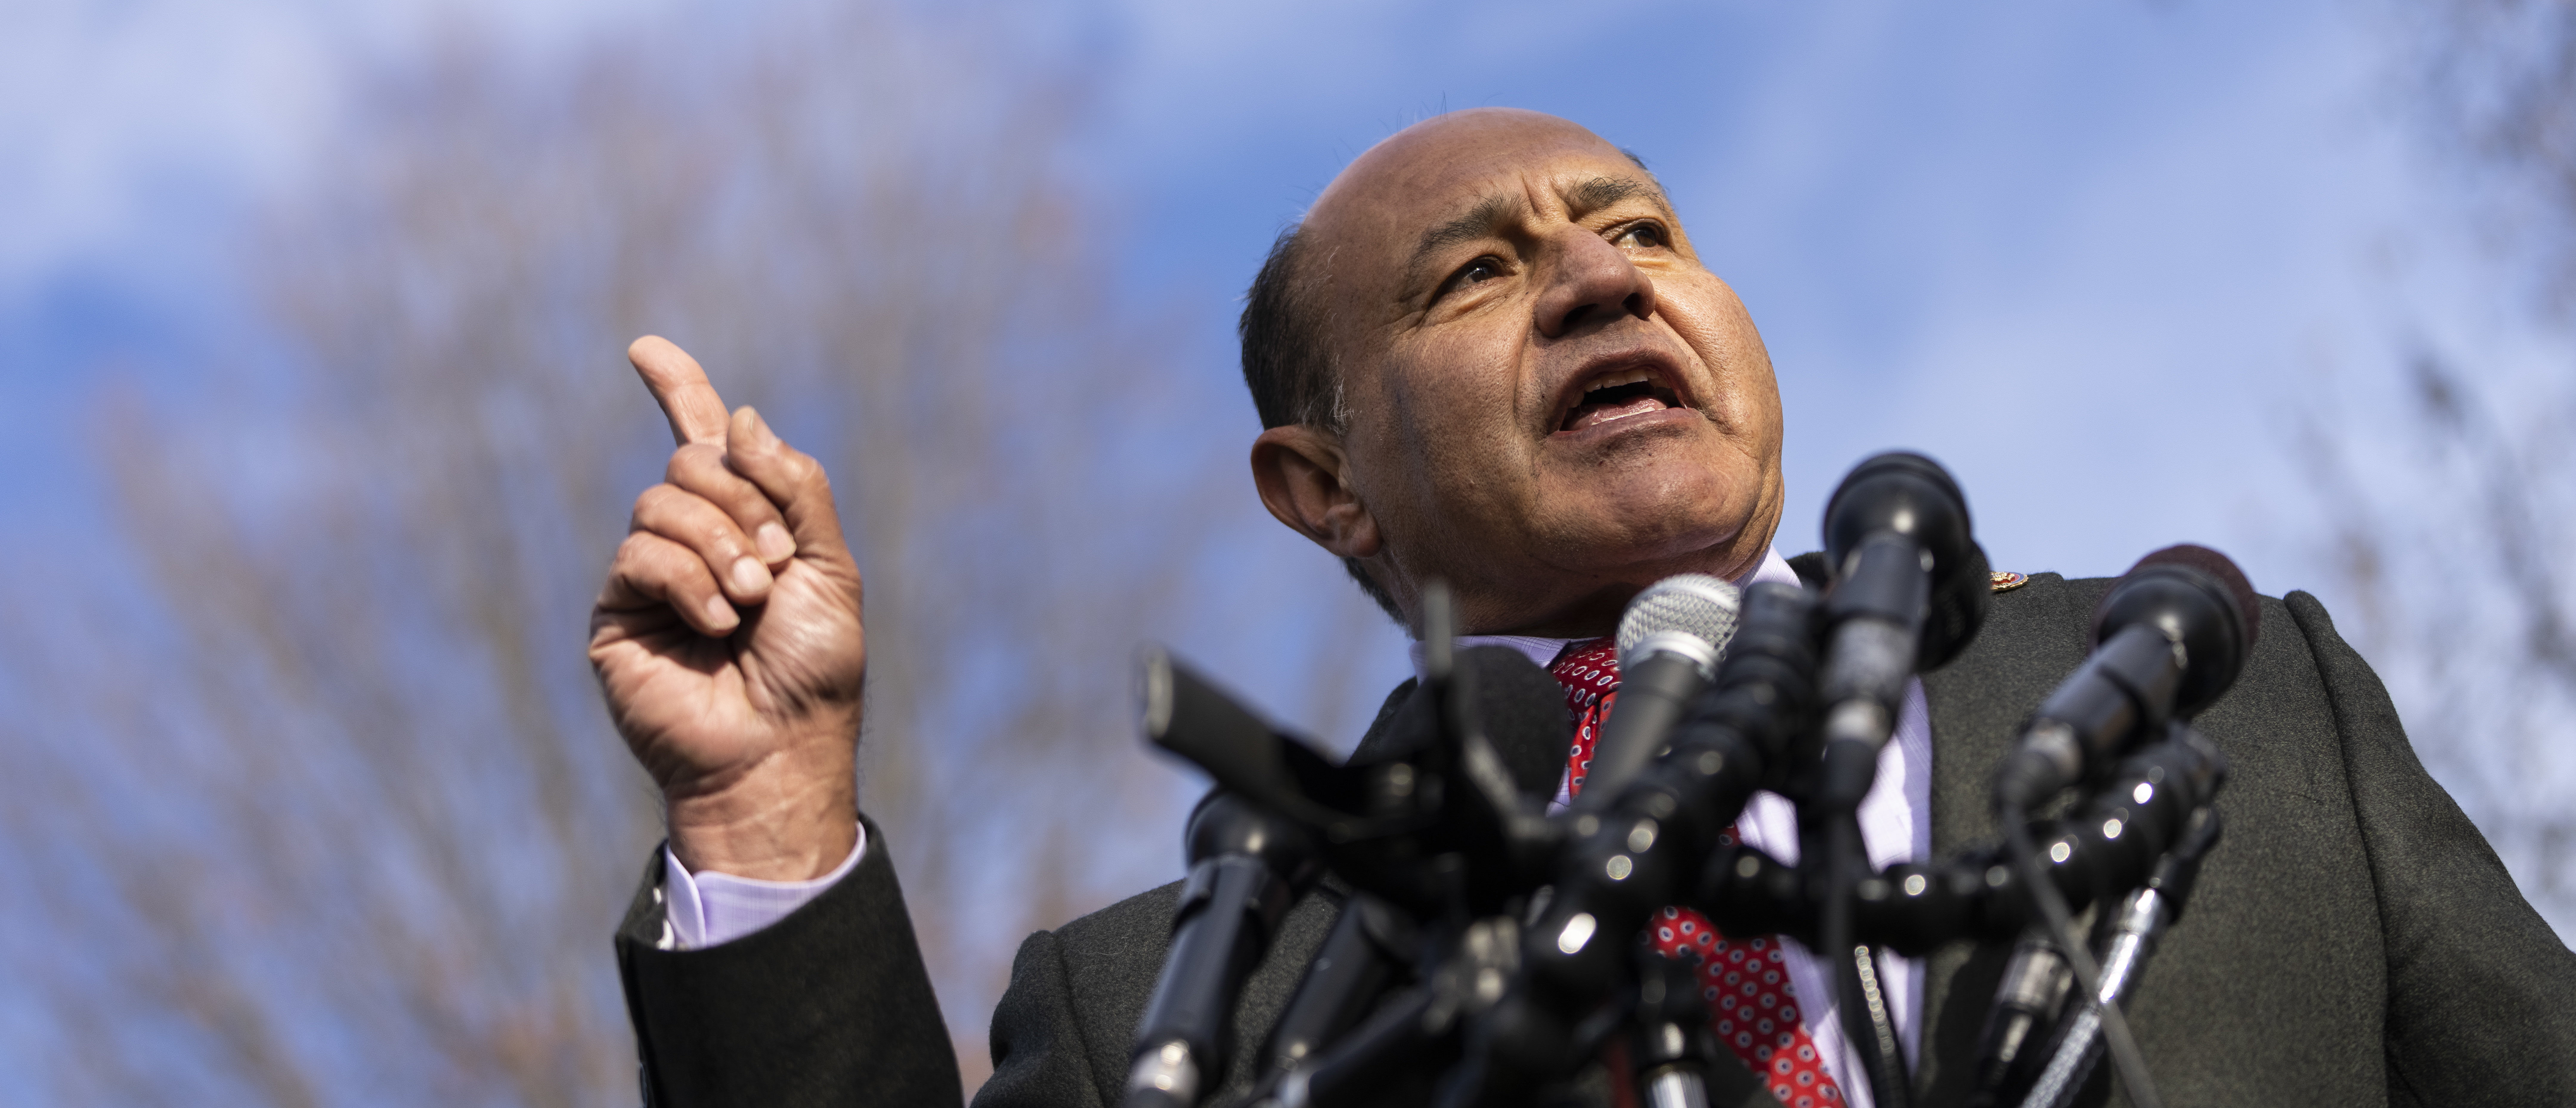 Rep. Correa Drags Jamal Simmons Over Tweet About ICE Deporting Illegal Immigrants